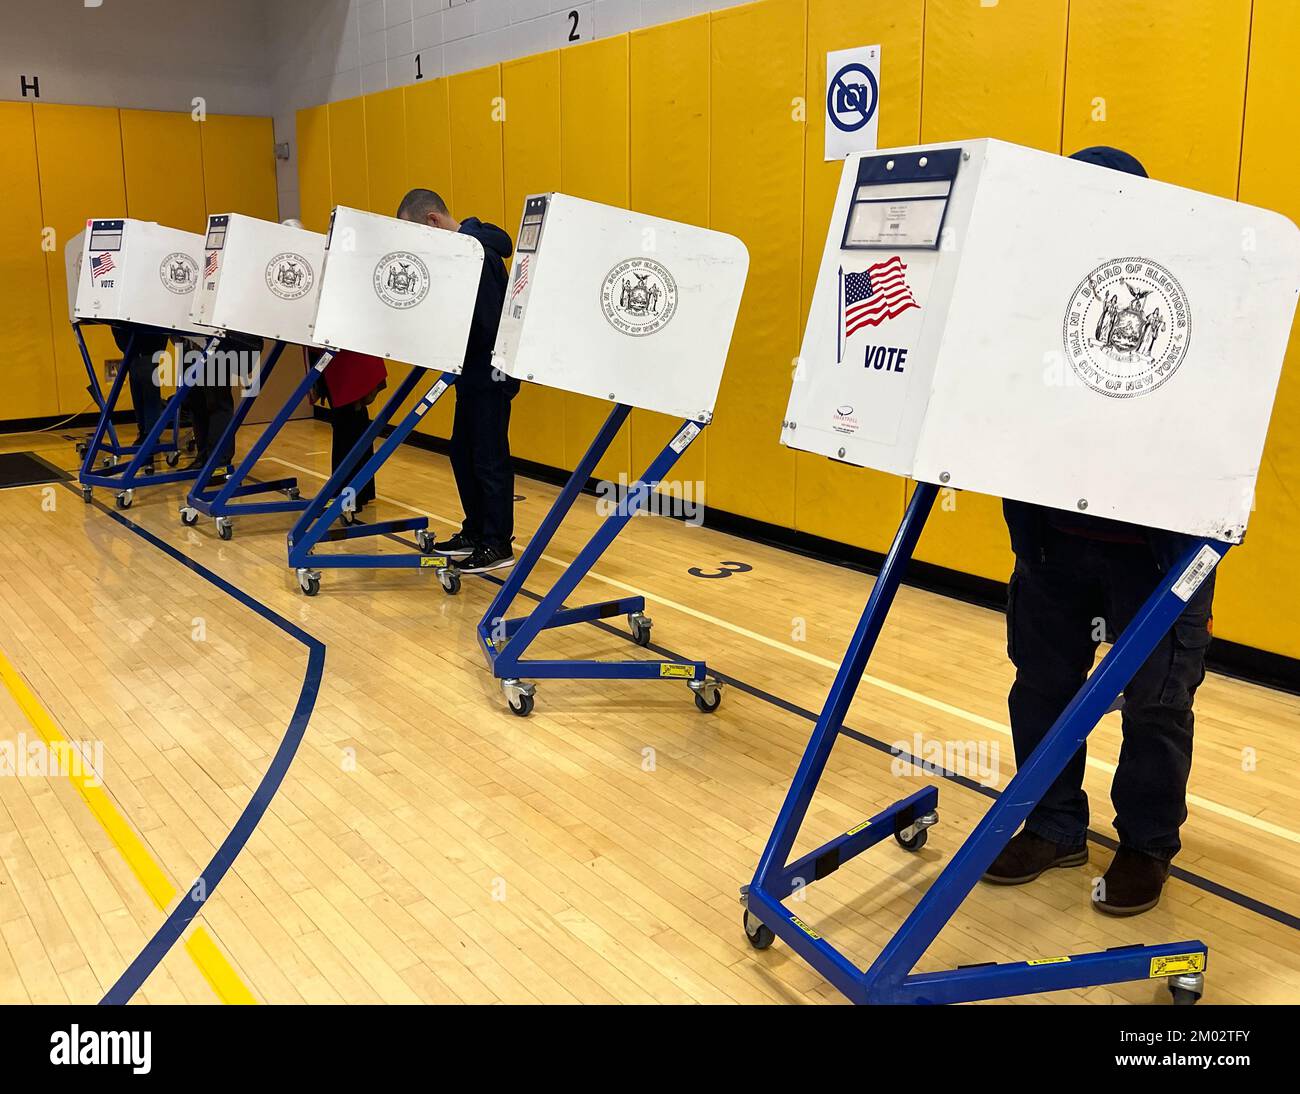 Polling place in a school  gymnasium for the 2022 midterm elections in the Park Slope neighborhood, Brooklyn, New York. Stock Photo